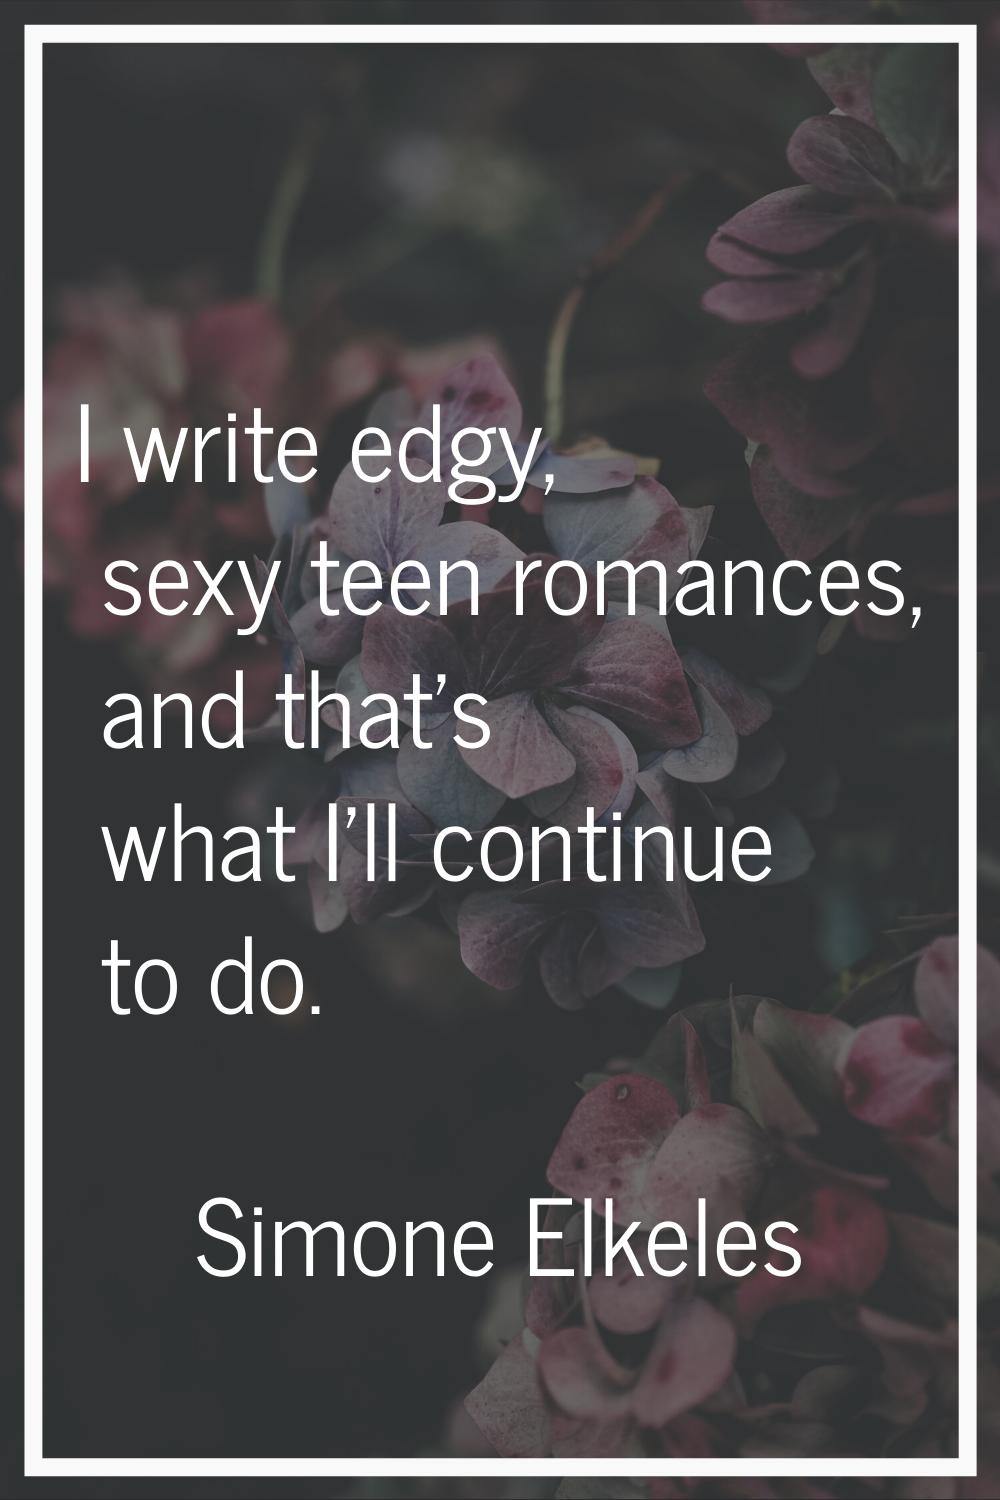 I write edgy, sexy teen romances, and that's what I'll continue to do.